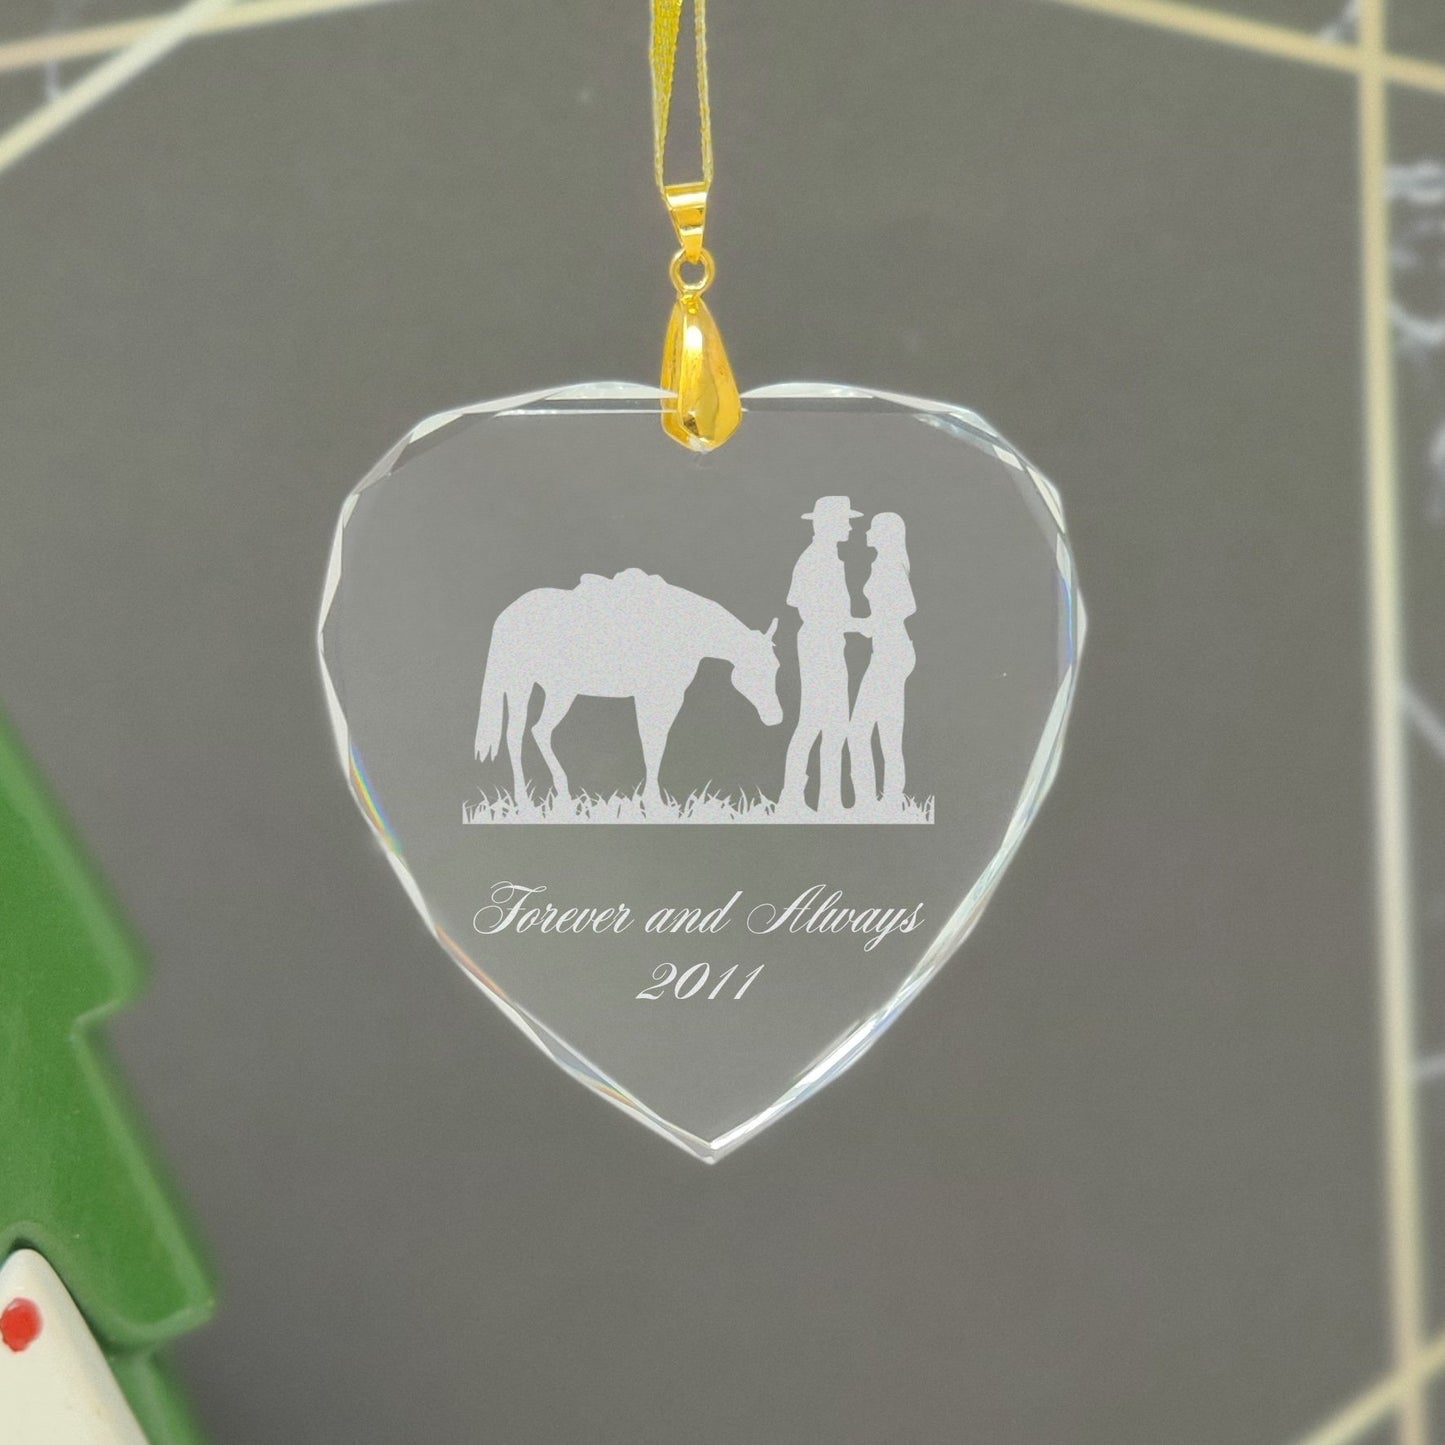 LaserGram Christmas Ornament, Fireman with Hose, Personalized Engraving Included (Heart Shape)